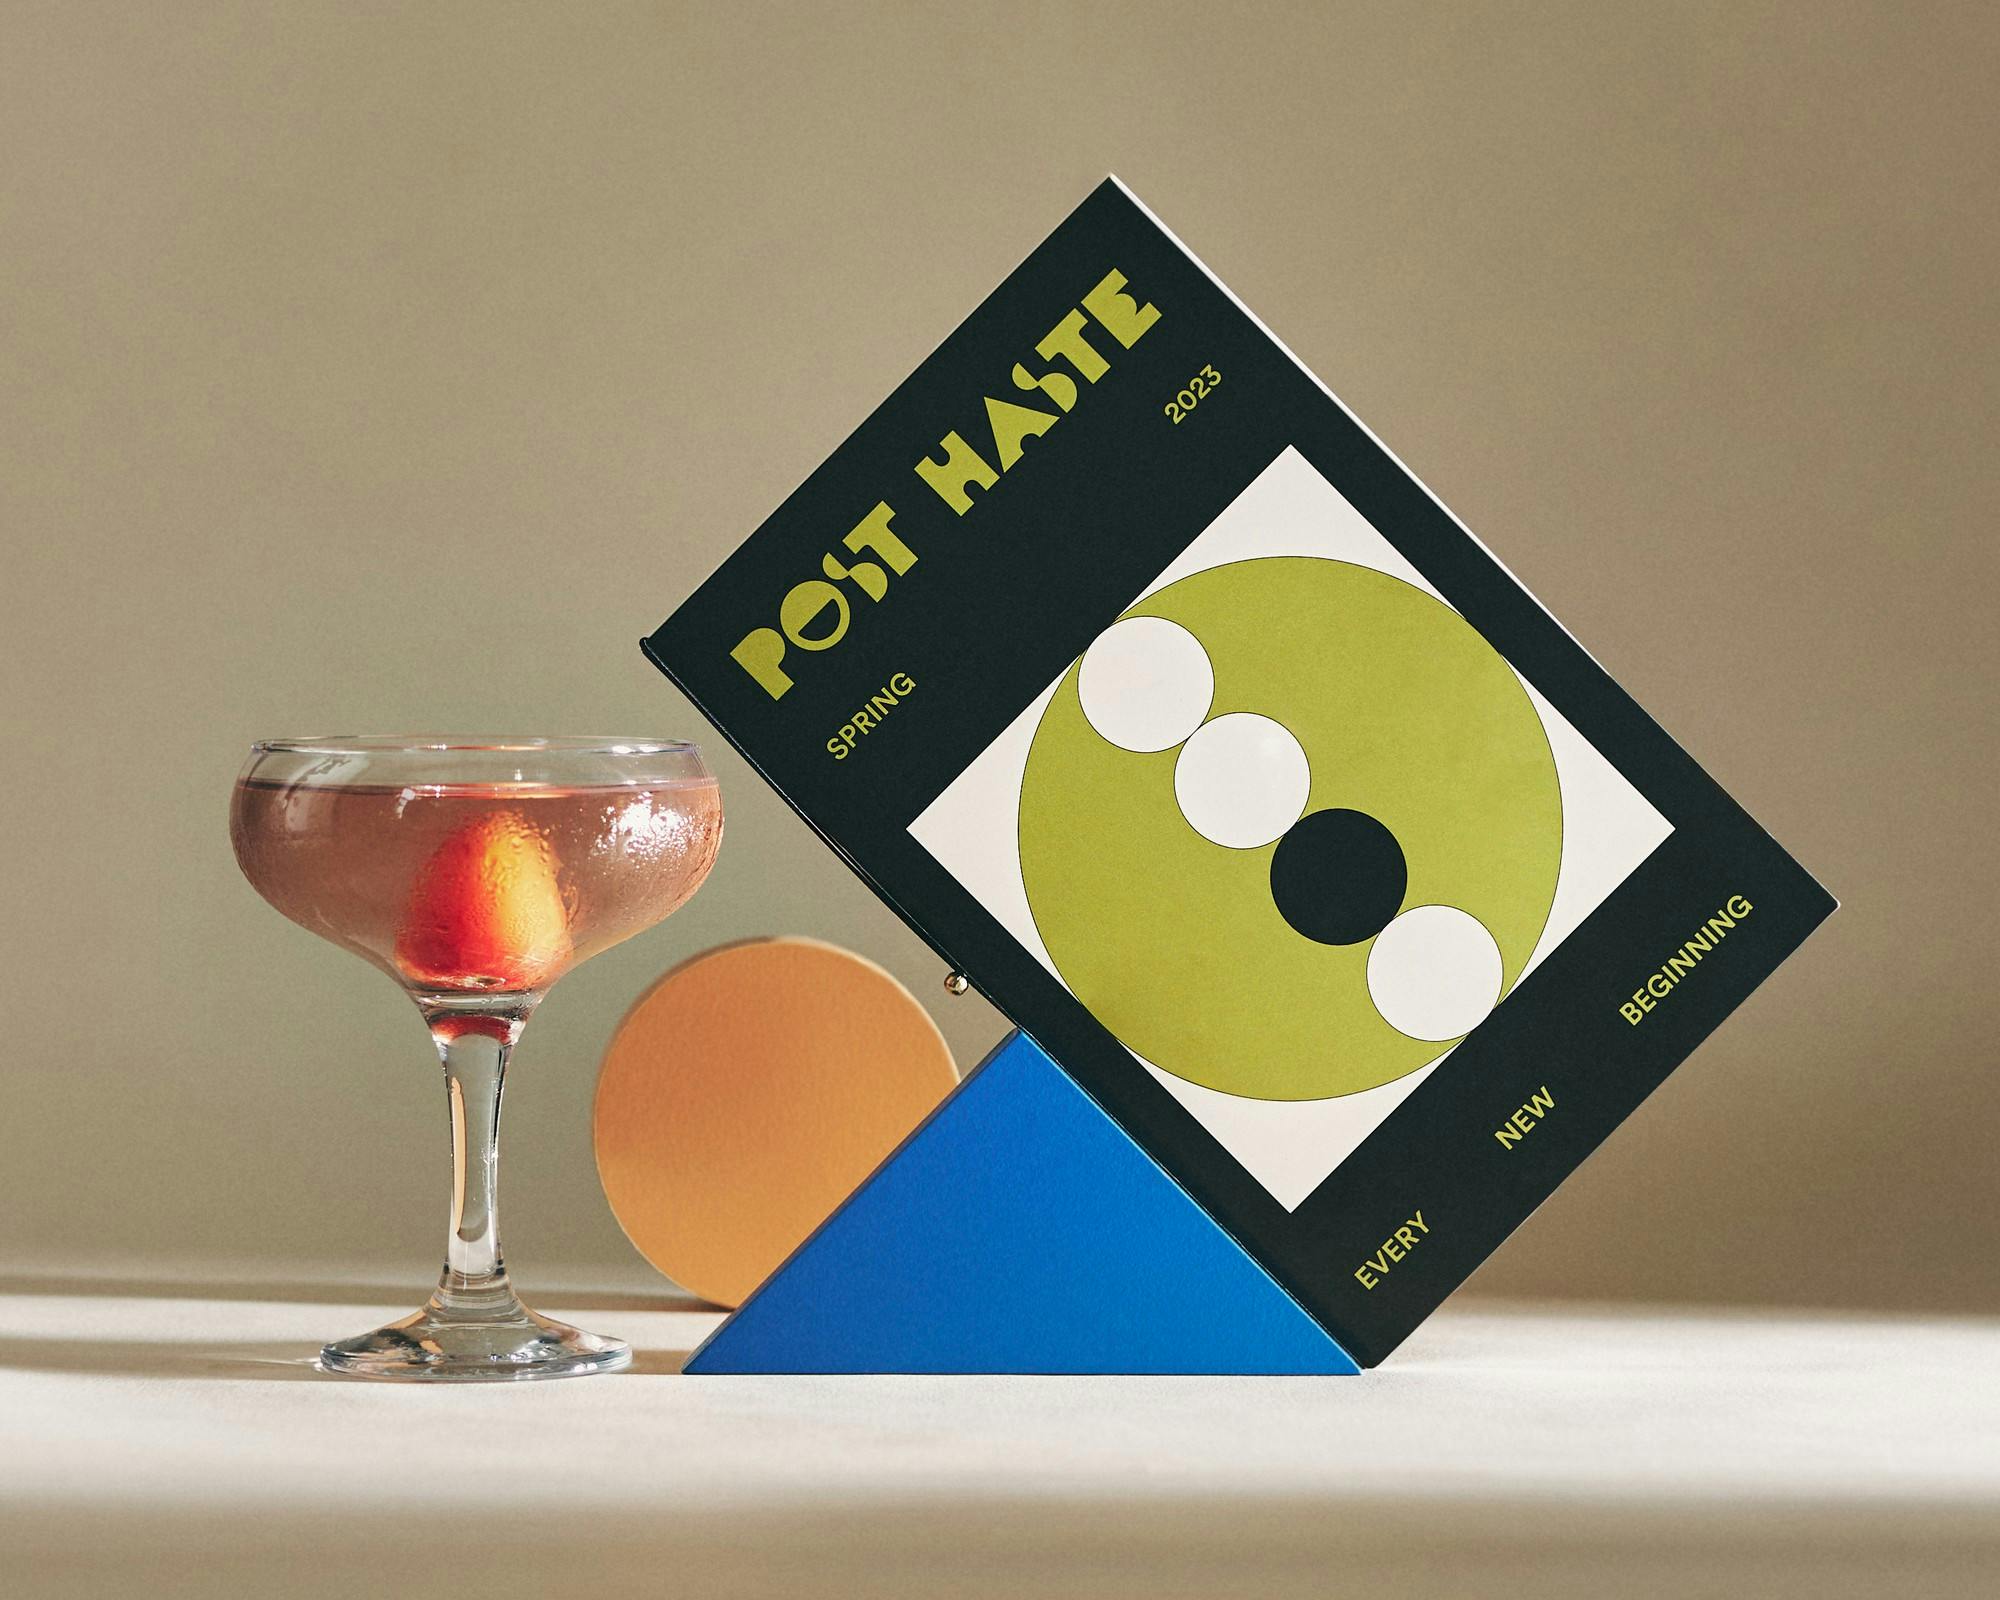 Post Haste Cocktail Bar Branding featured image